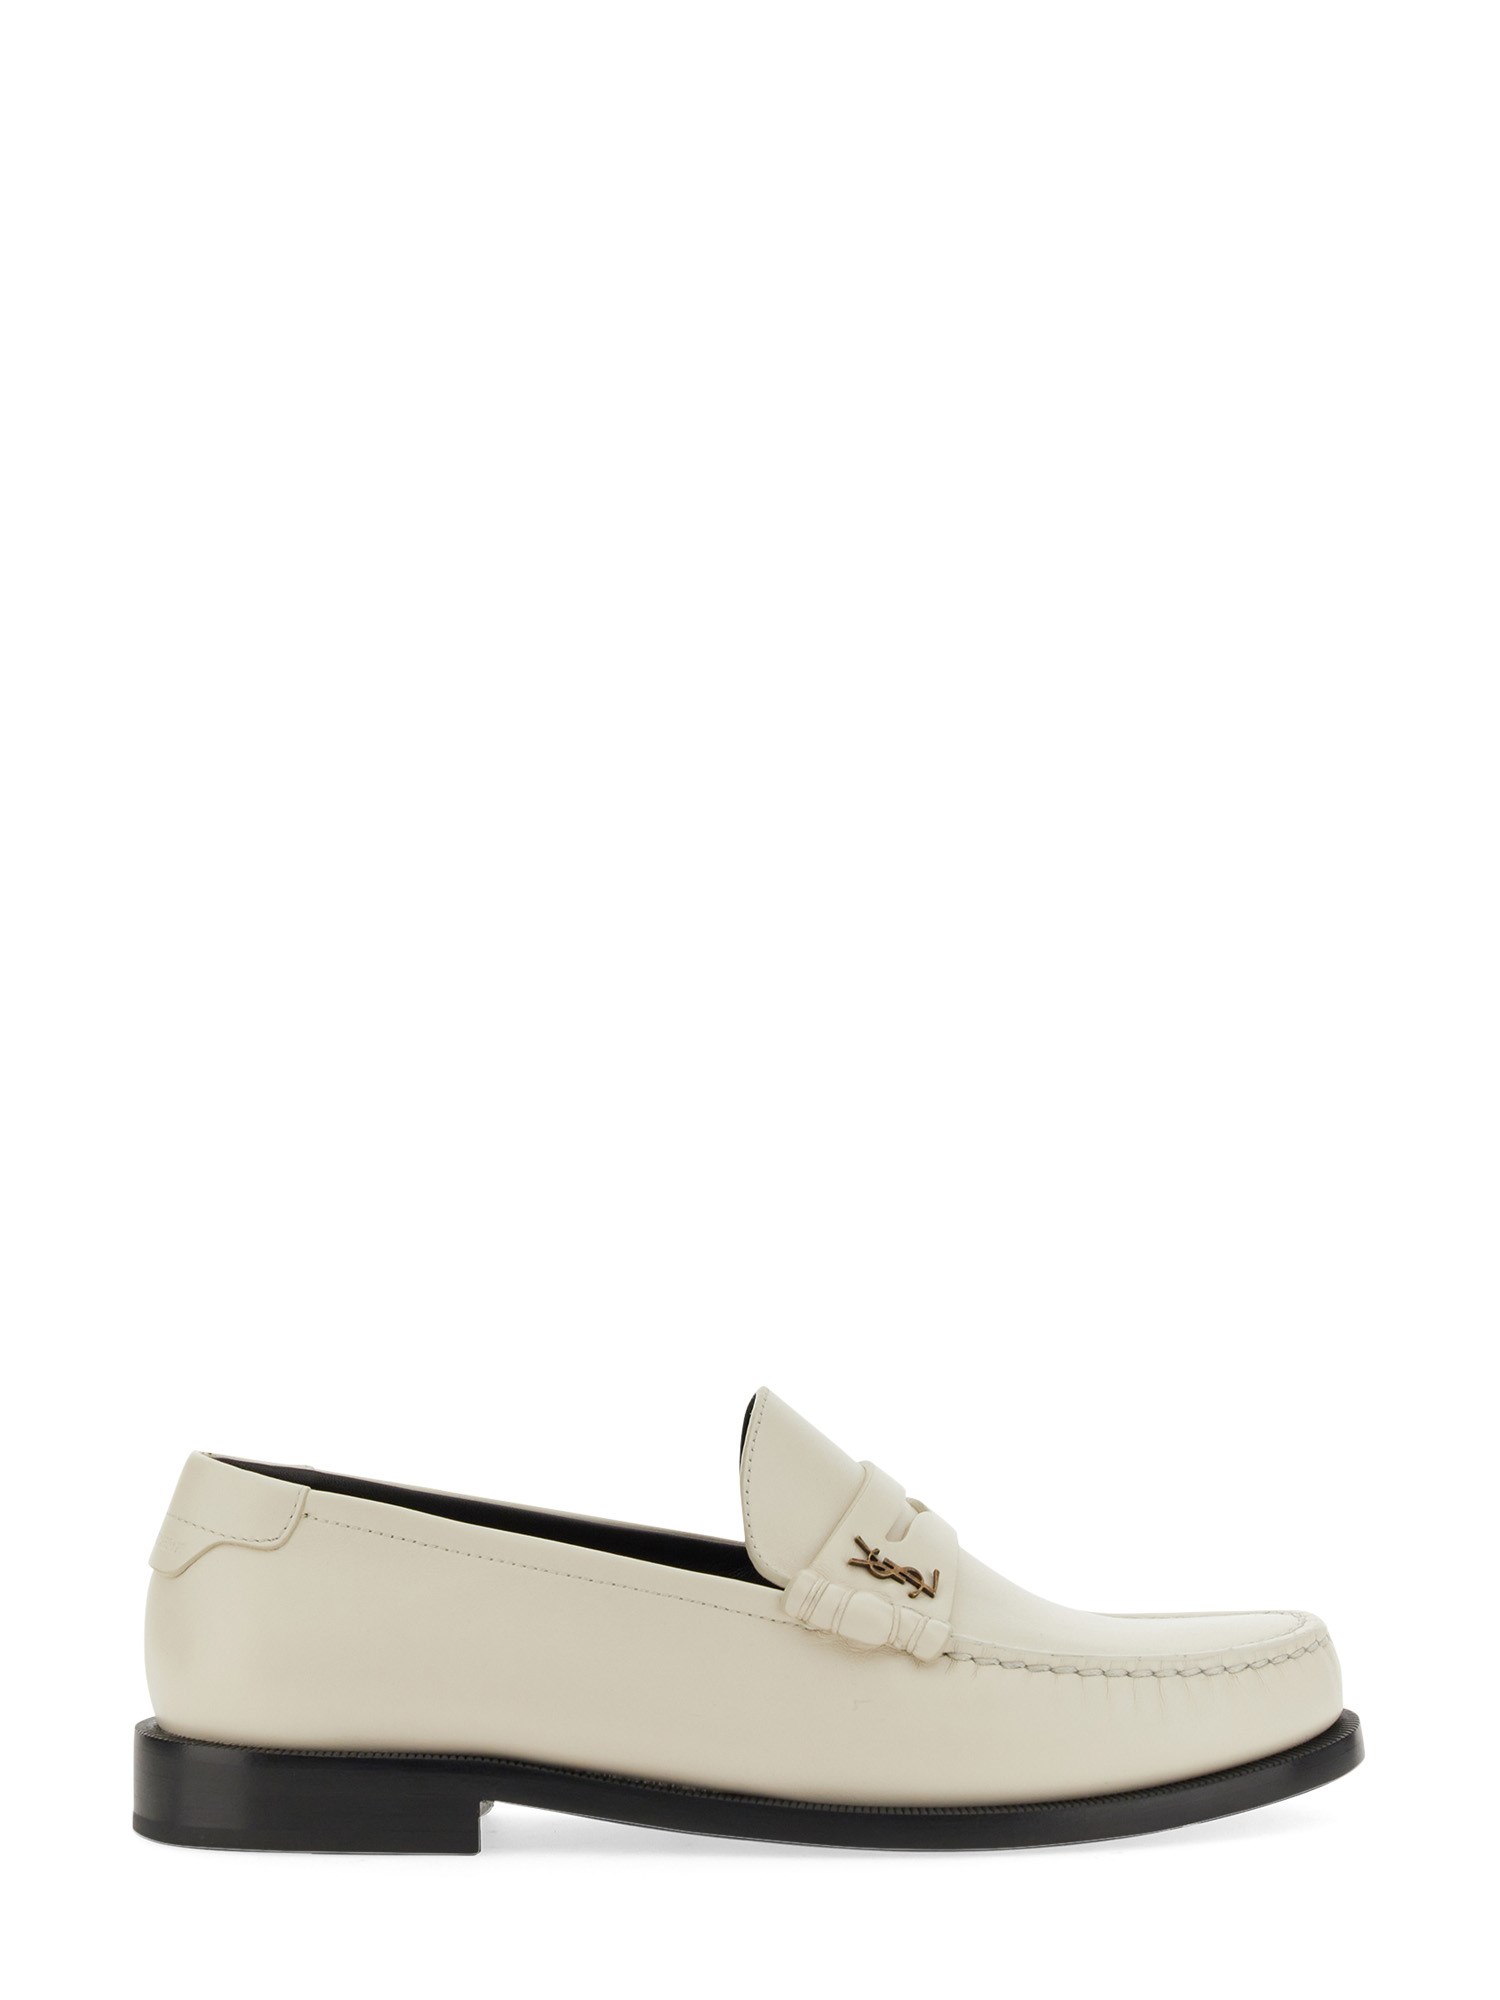 Saint Laurent Leather Loafer With Monogram In White